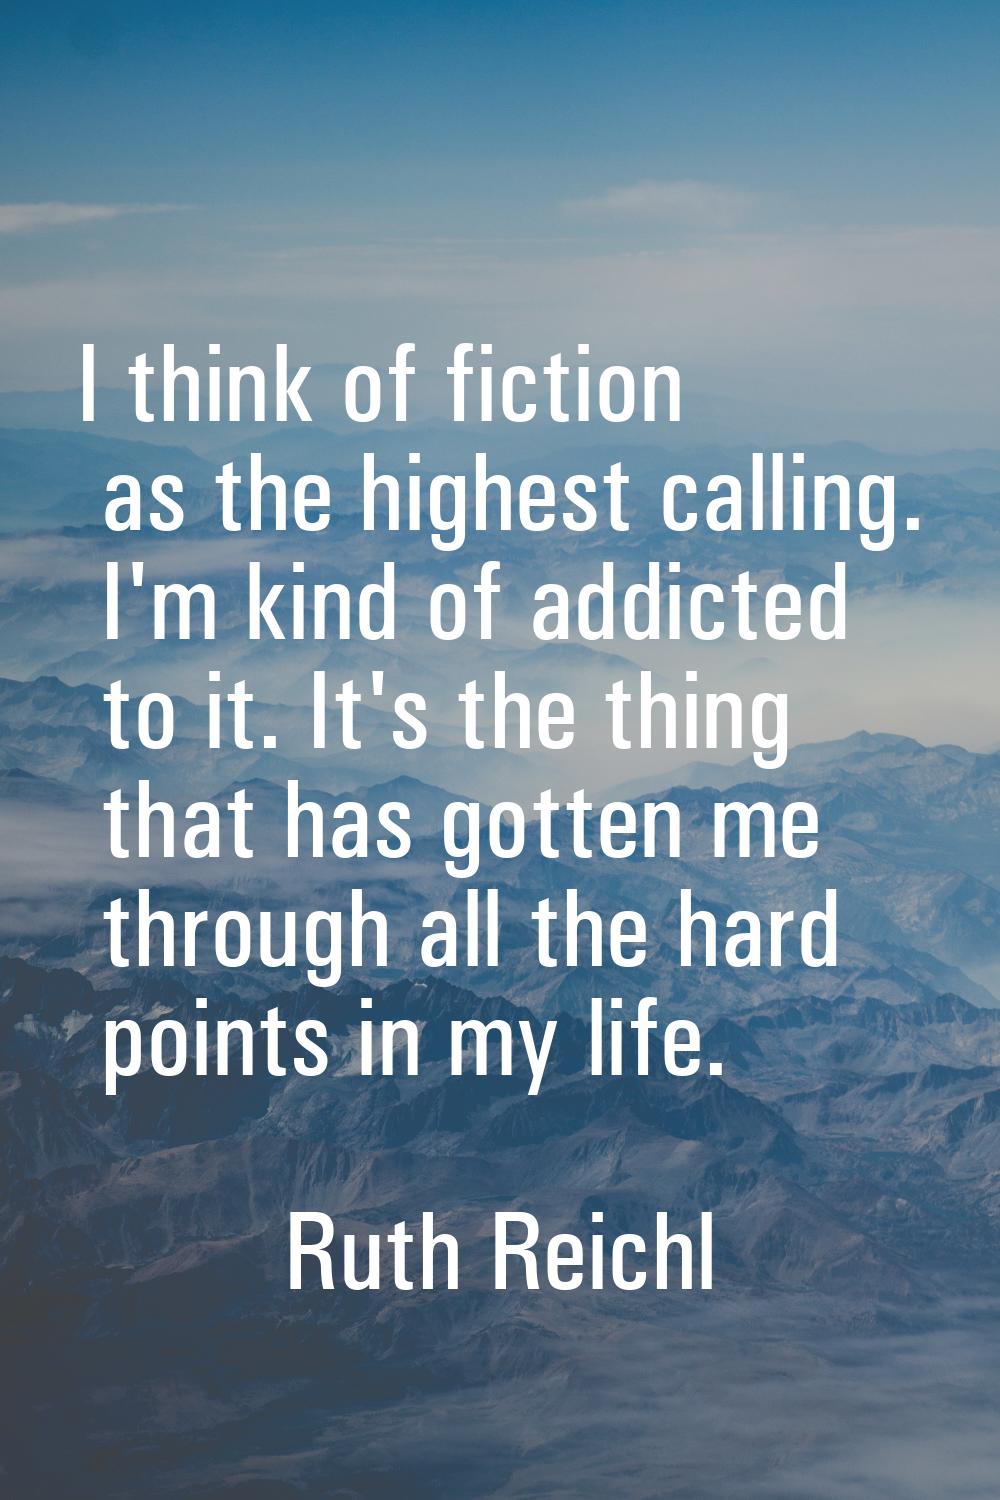 I think of fiction as the highest calling. I'm kind of addicted to it. It's the thing that has gott